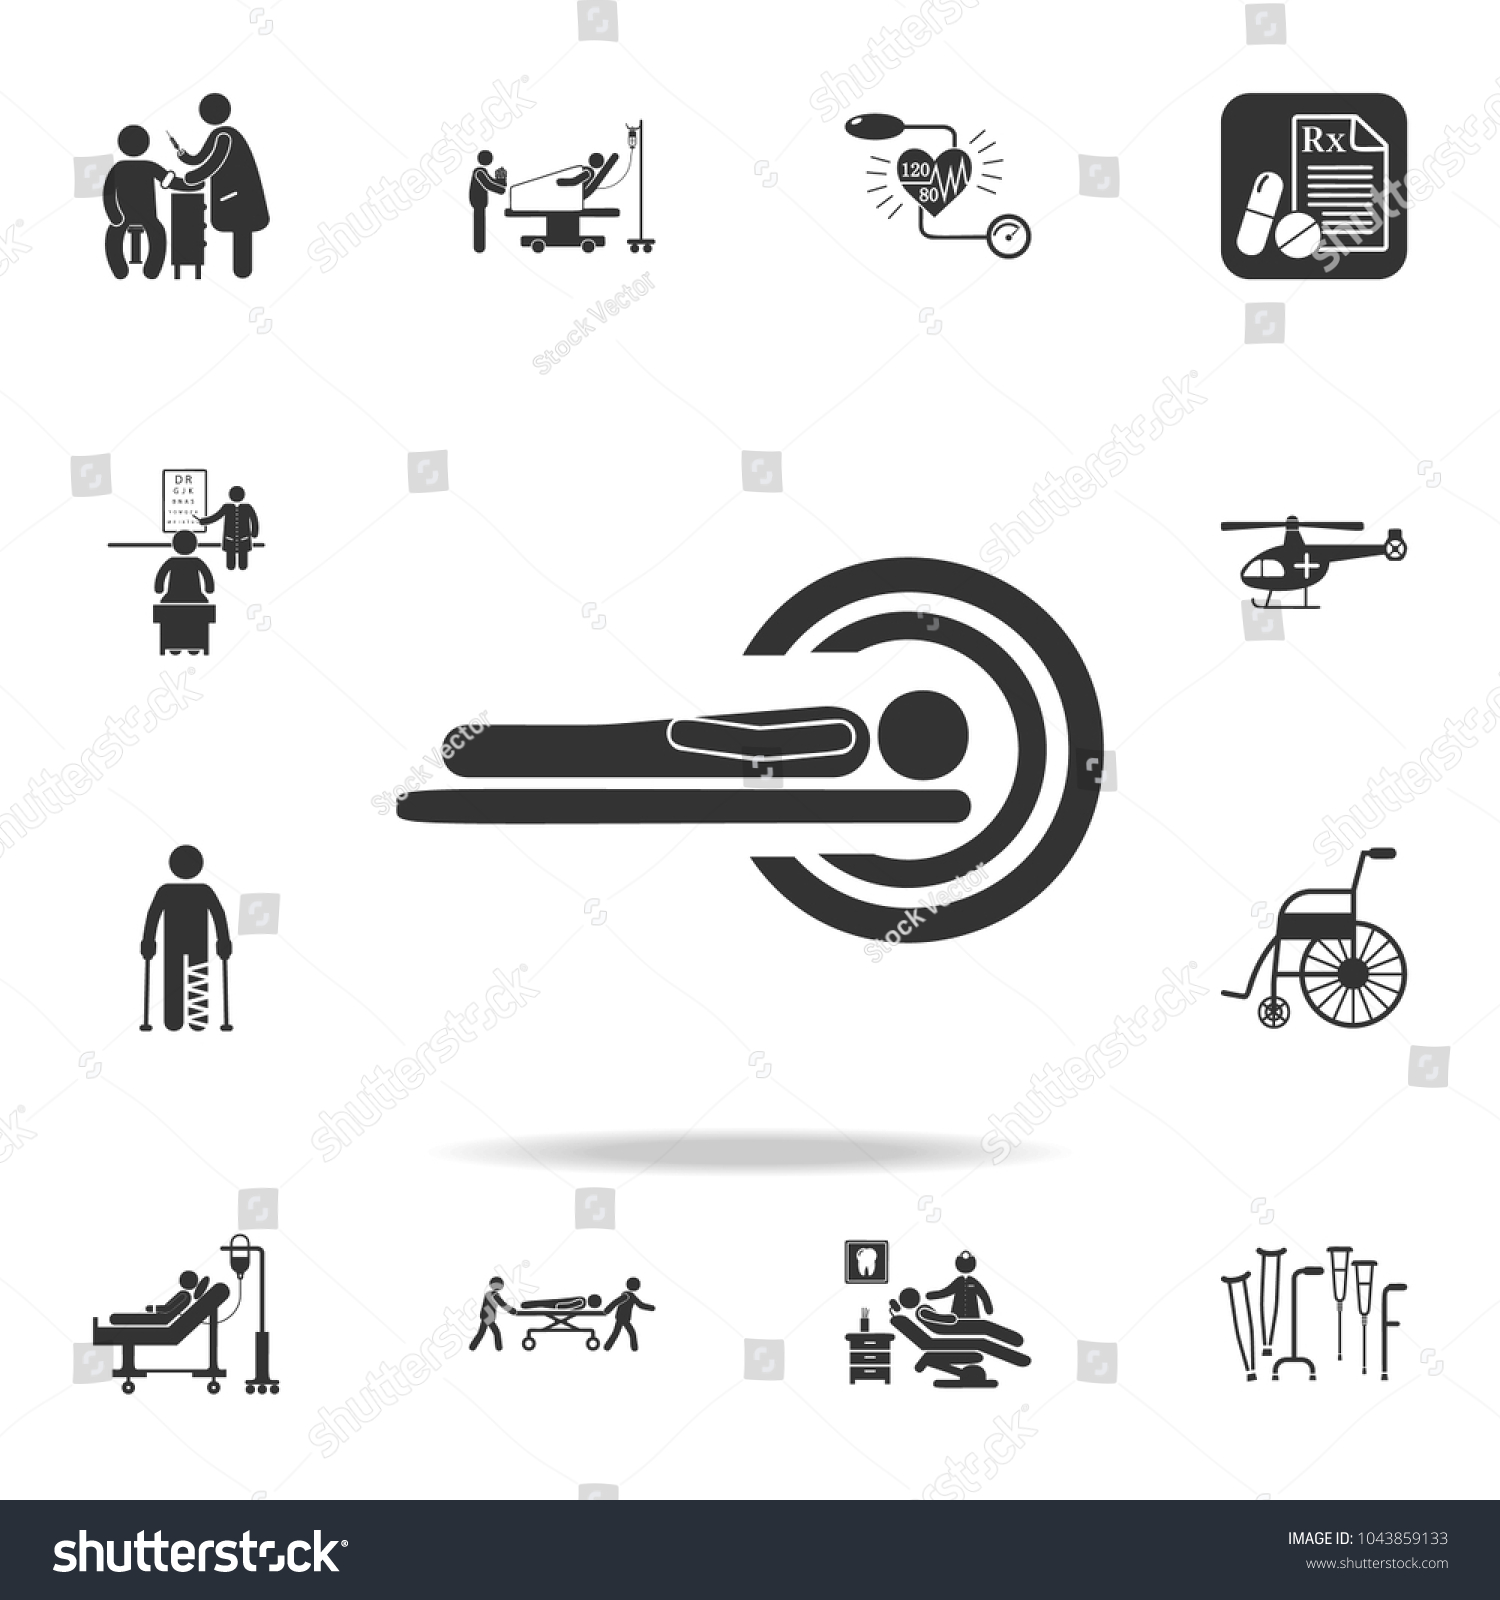 SVG of A patient in CT Scan Icon. Detailed set of medicine element Illustration. Premium quality graphic design. One of the collection icons for websites, web design, mobile app on white background svg